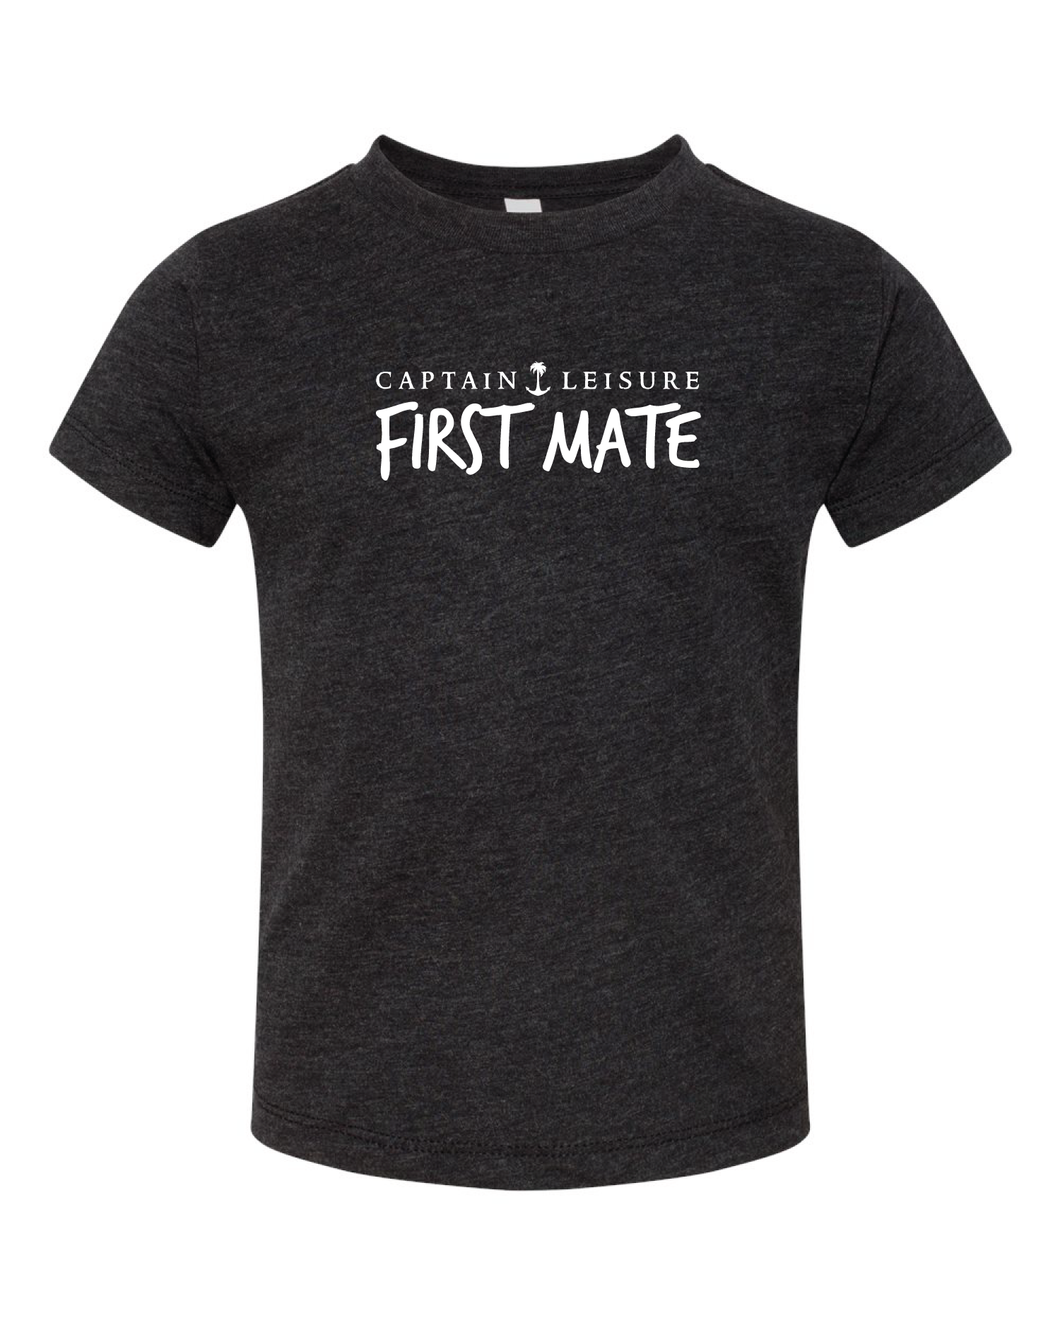 SALE: Youth First Mate Tshirt